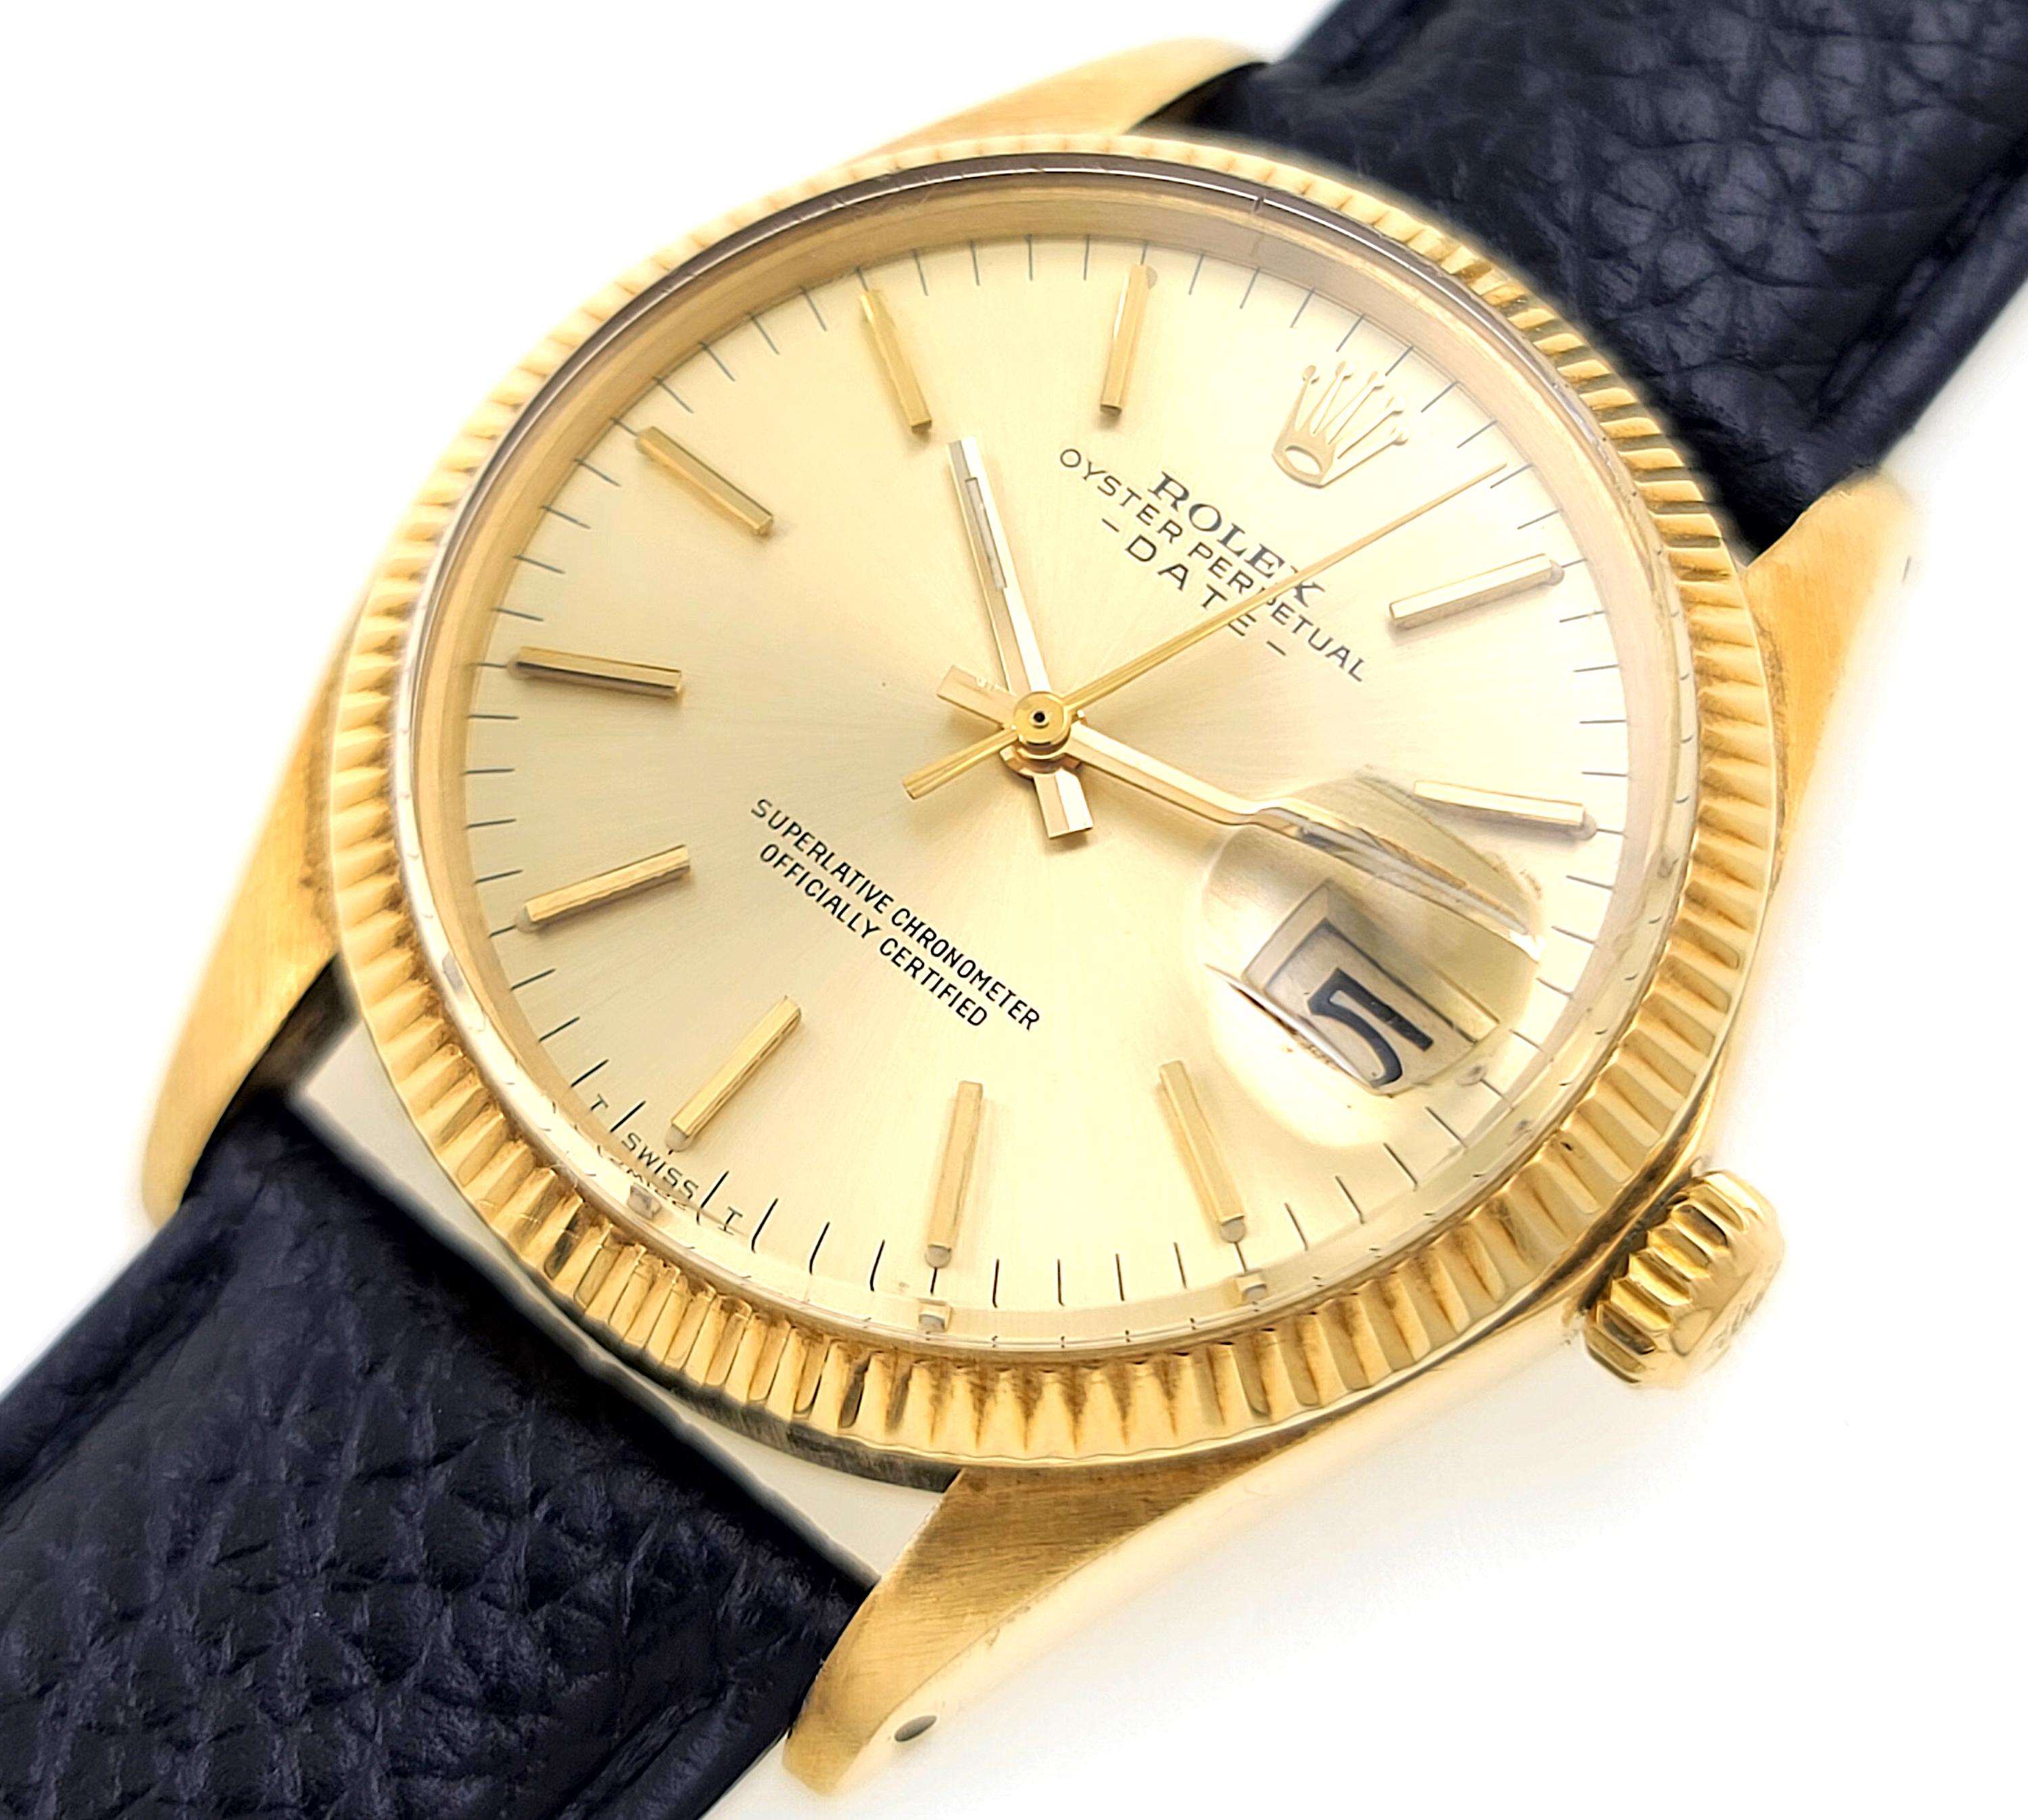 Rolex Oyster Perpetual Date 1503 Gold Sunburst Dial Solid Gold 14k Gold, 1973 For Sale 1